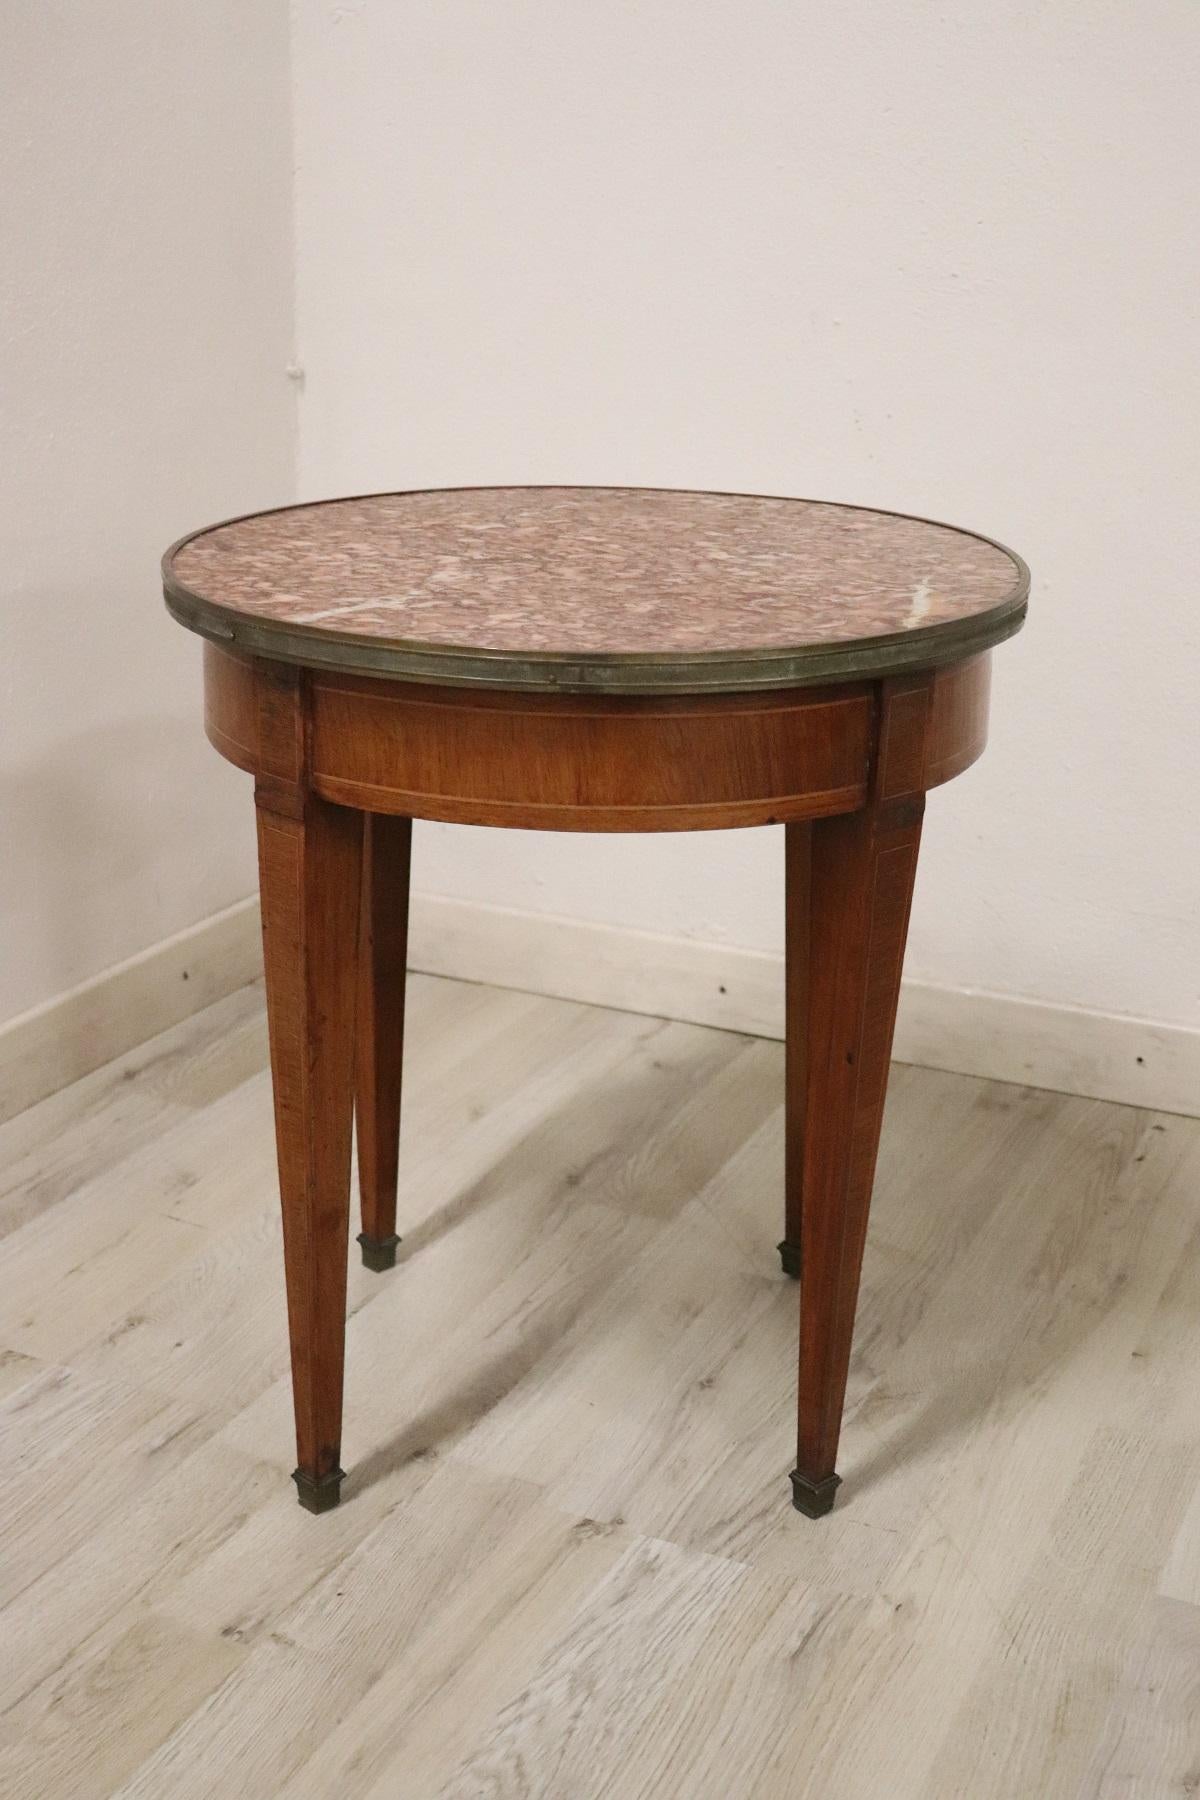 Rare and fine quality Italian Louis XVI style, 1930s side table or coffee table. The table has a particular legs slender. Fine inlay walnut decoration in precious wood. Red Italian marble top. Precious gilt bronze decorations with ancient patina.